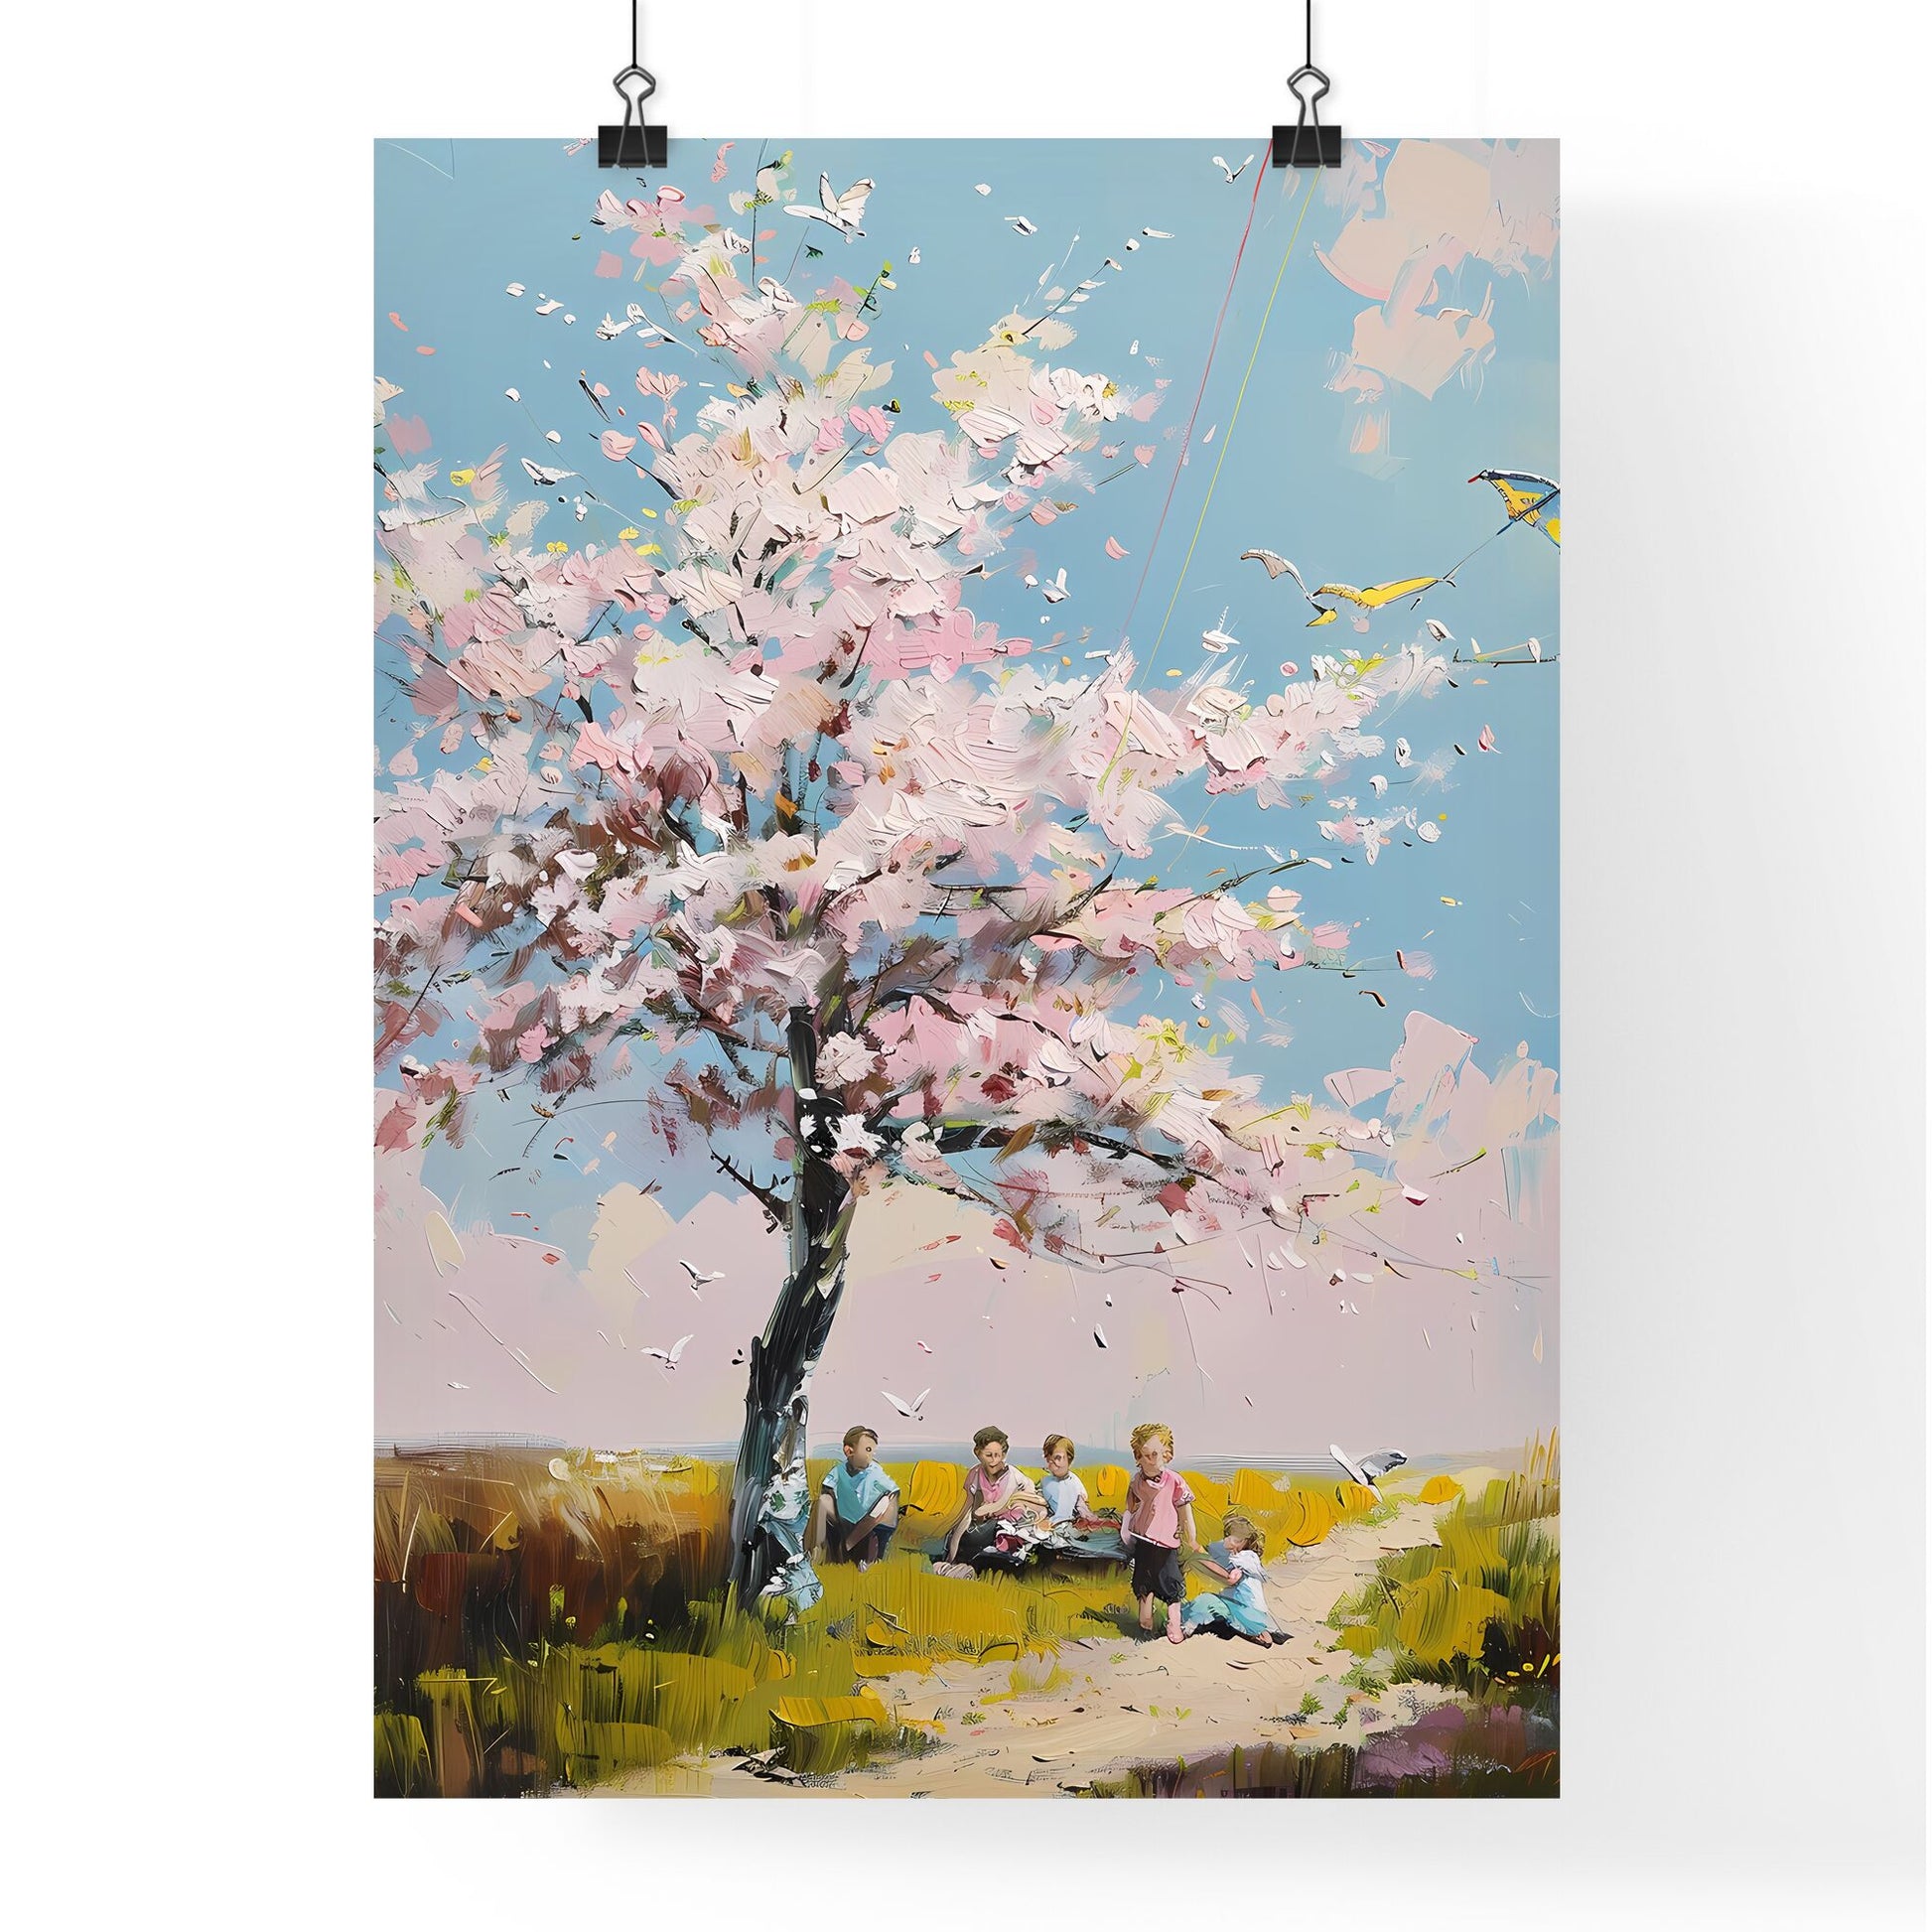 Impressionistic Spring Picnic Under Cherry Tree with Kite-Flying Children and Pink Blossoms Default Title